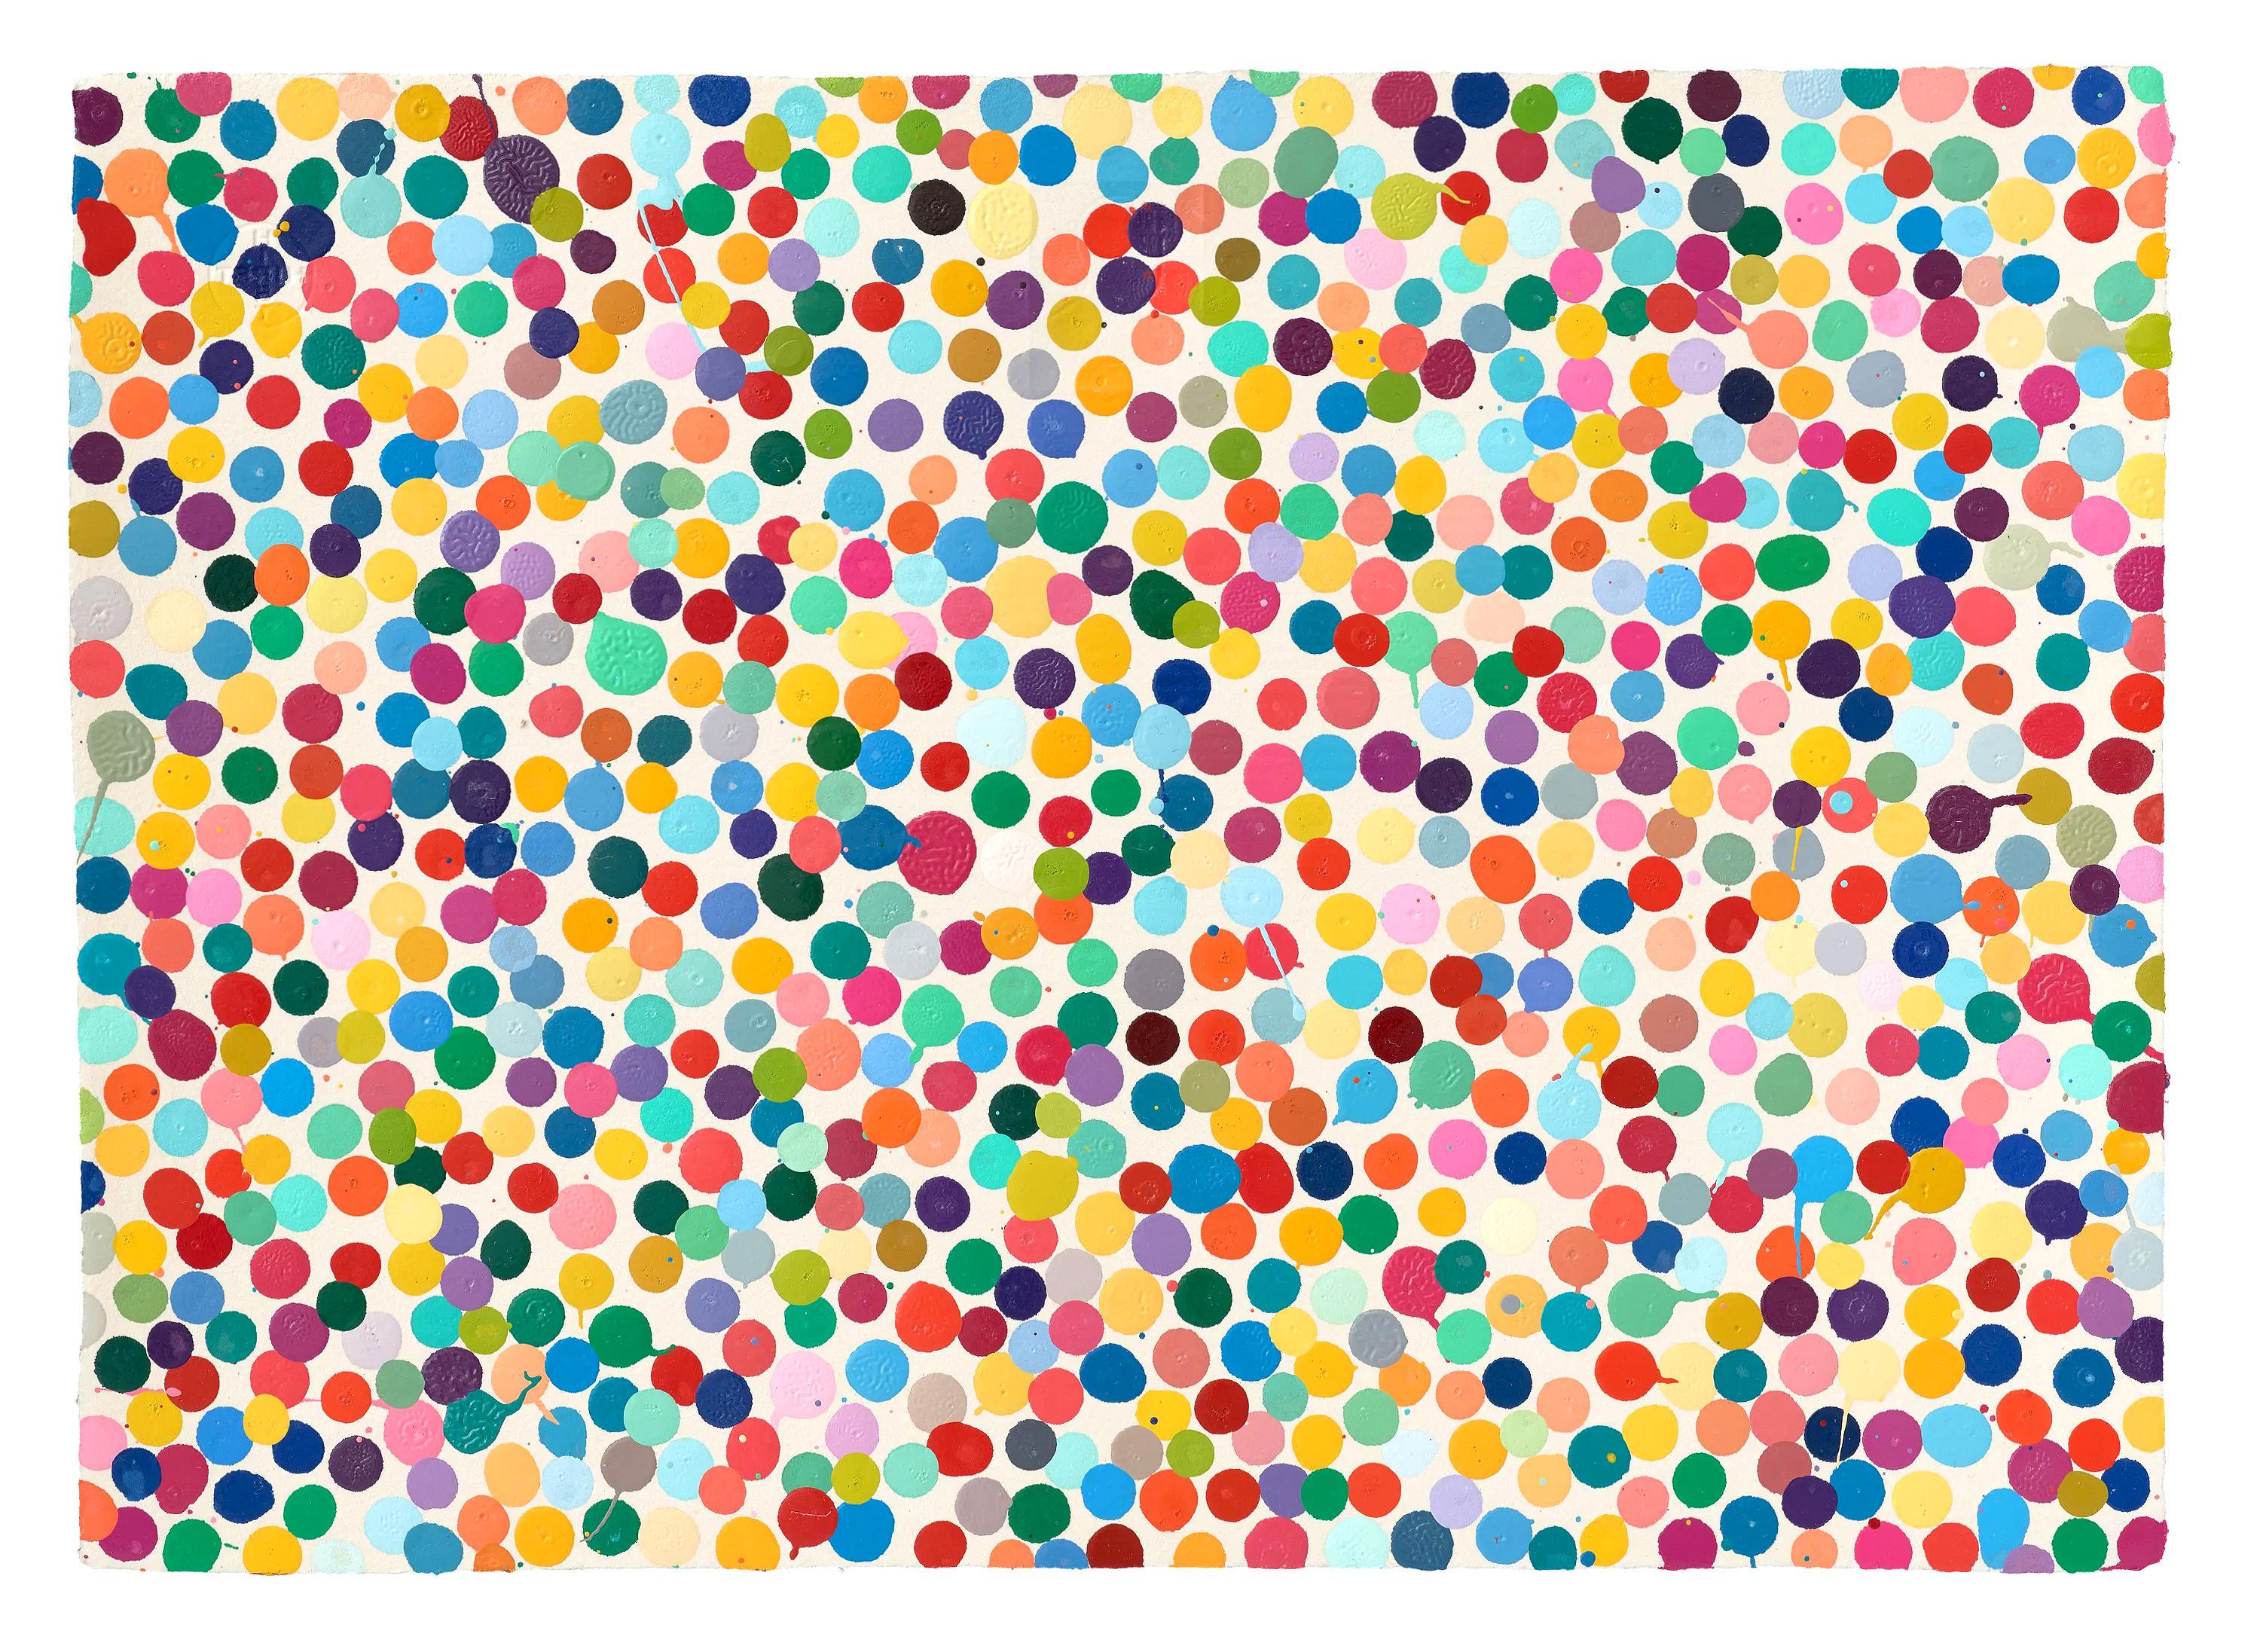 Damien Hirst Abstract Painting - DAMIEN HIRST - THE CURRENCY. Original work The Currency Project. Dots. Colors